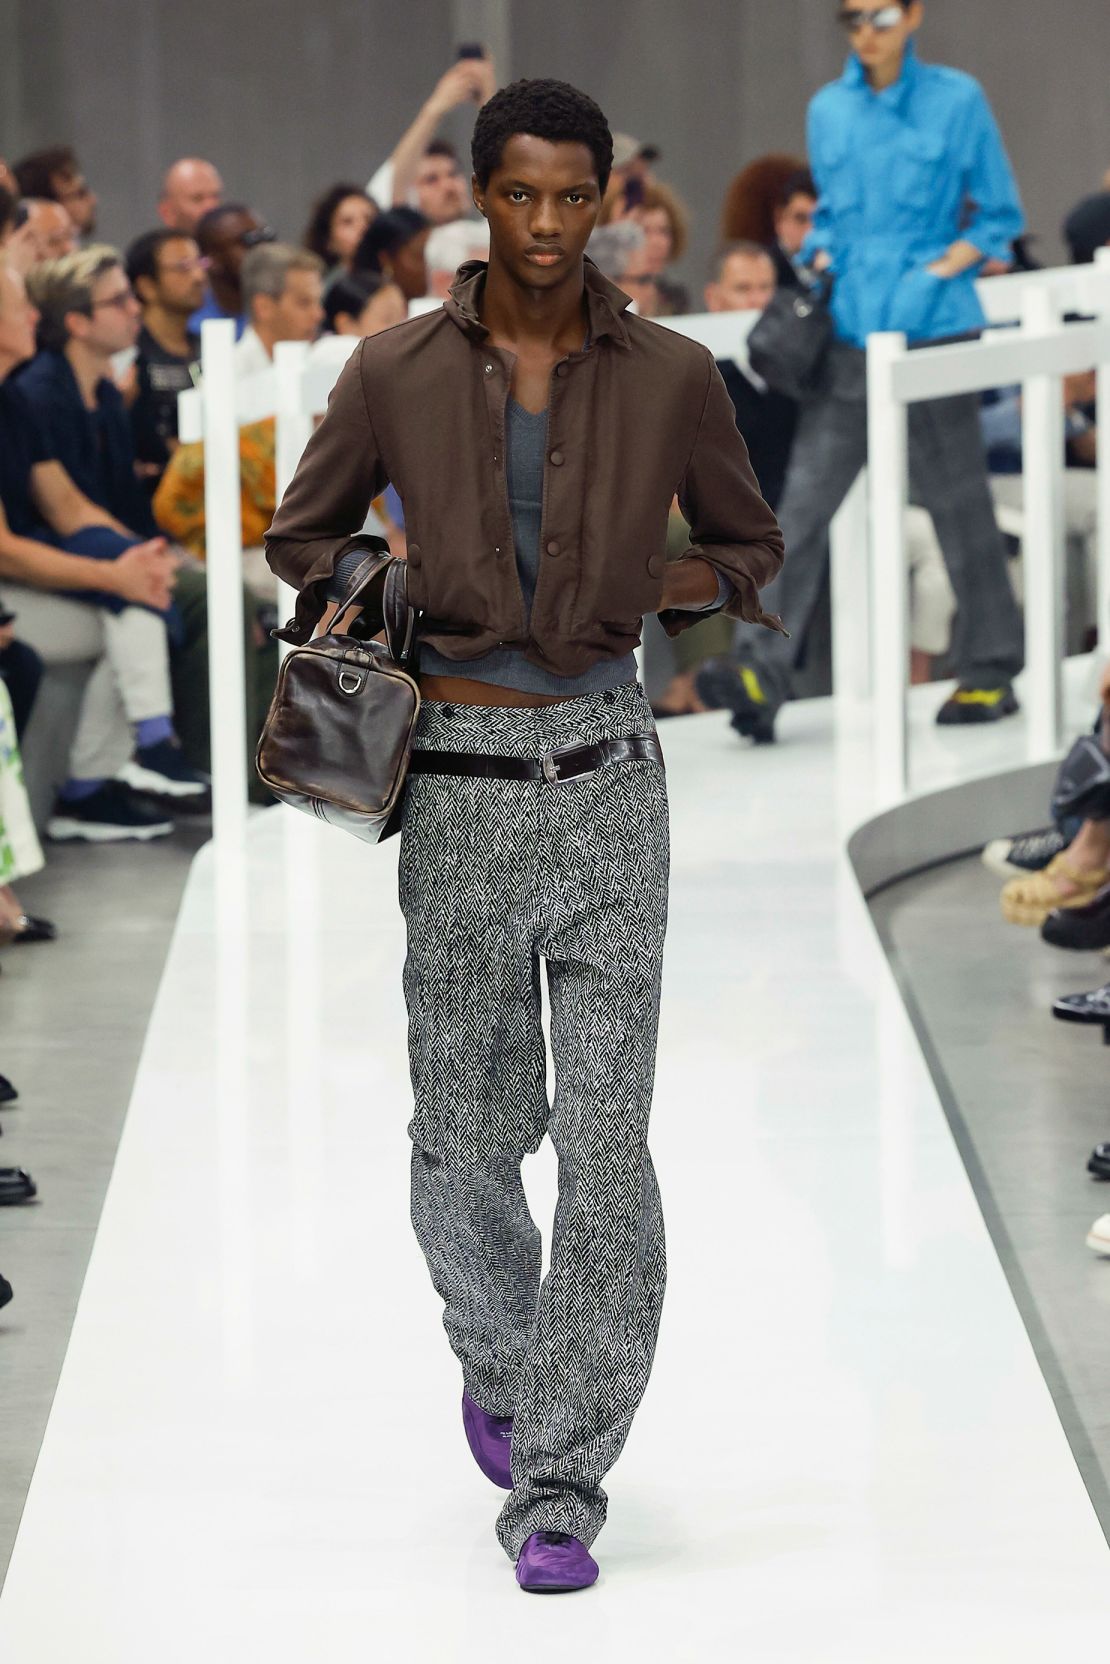 Dropped-waist belts were painted onto trousers in the style of tromp l’oeil at Prada.